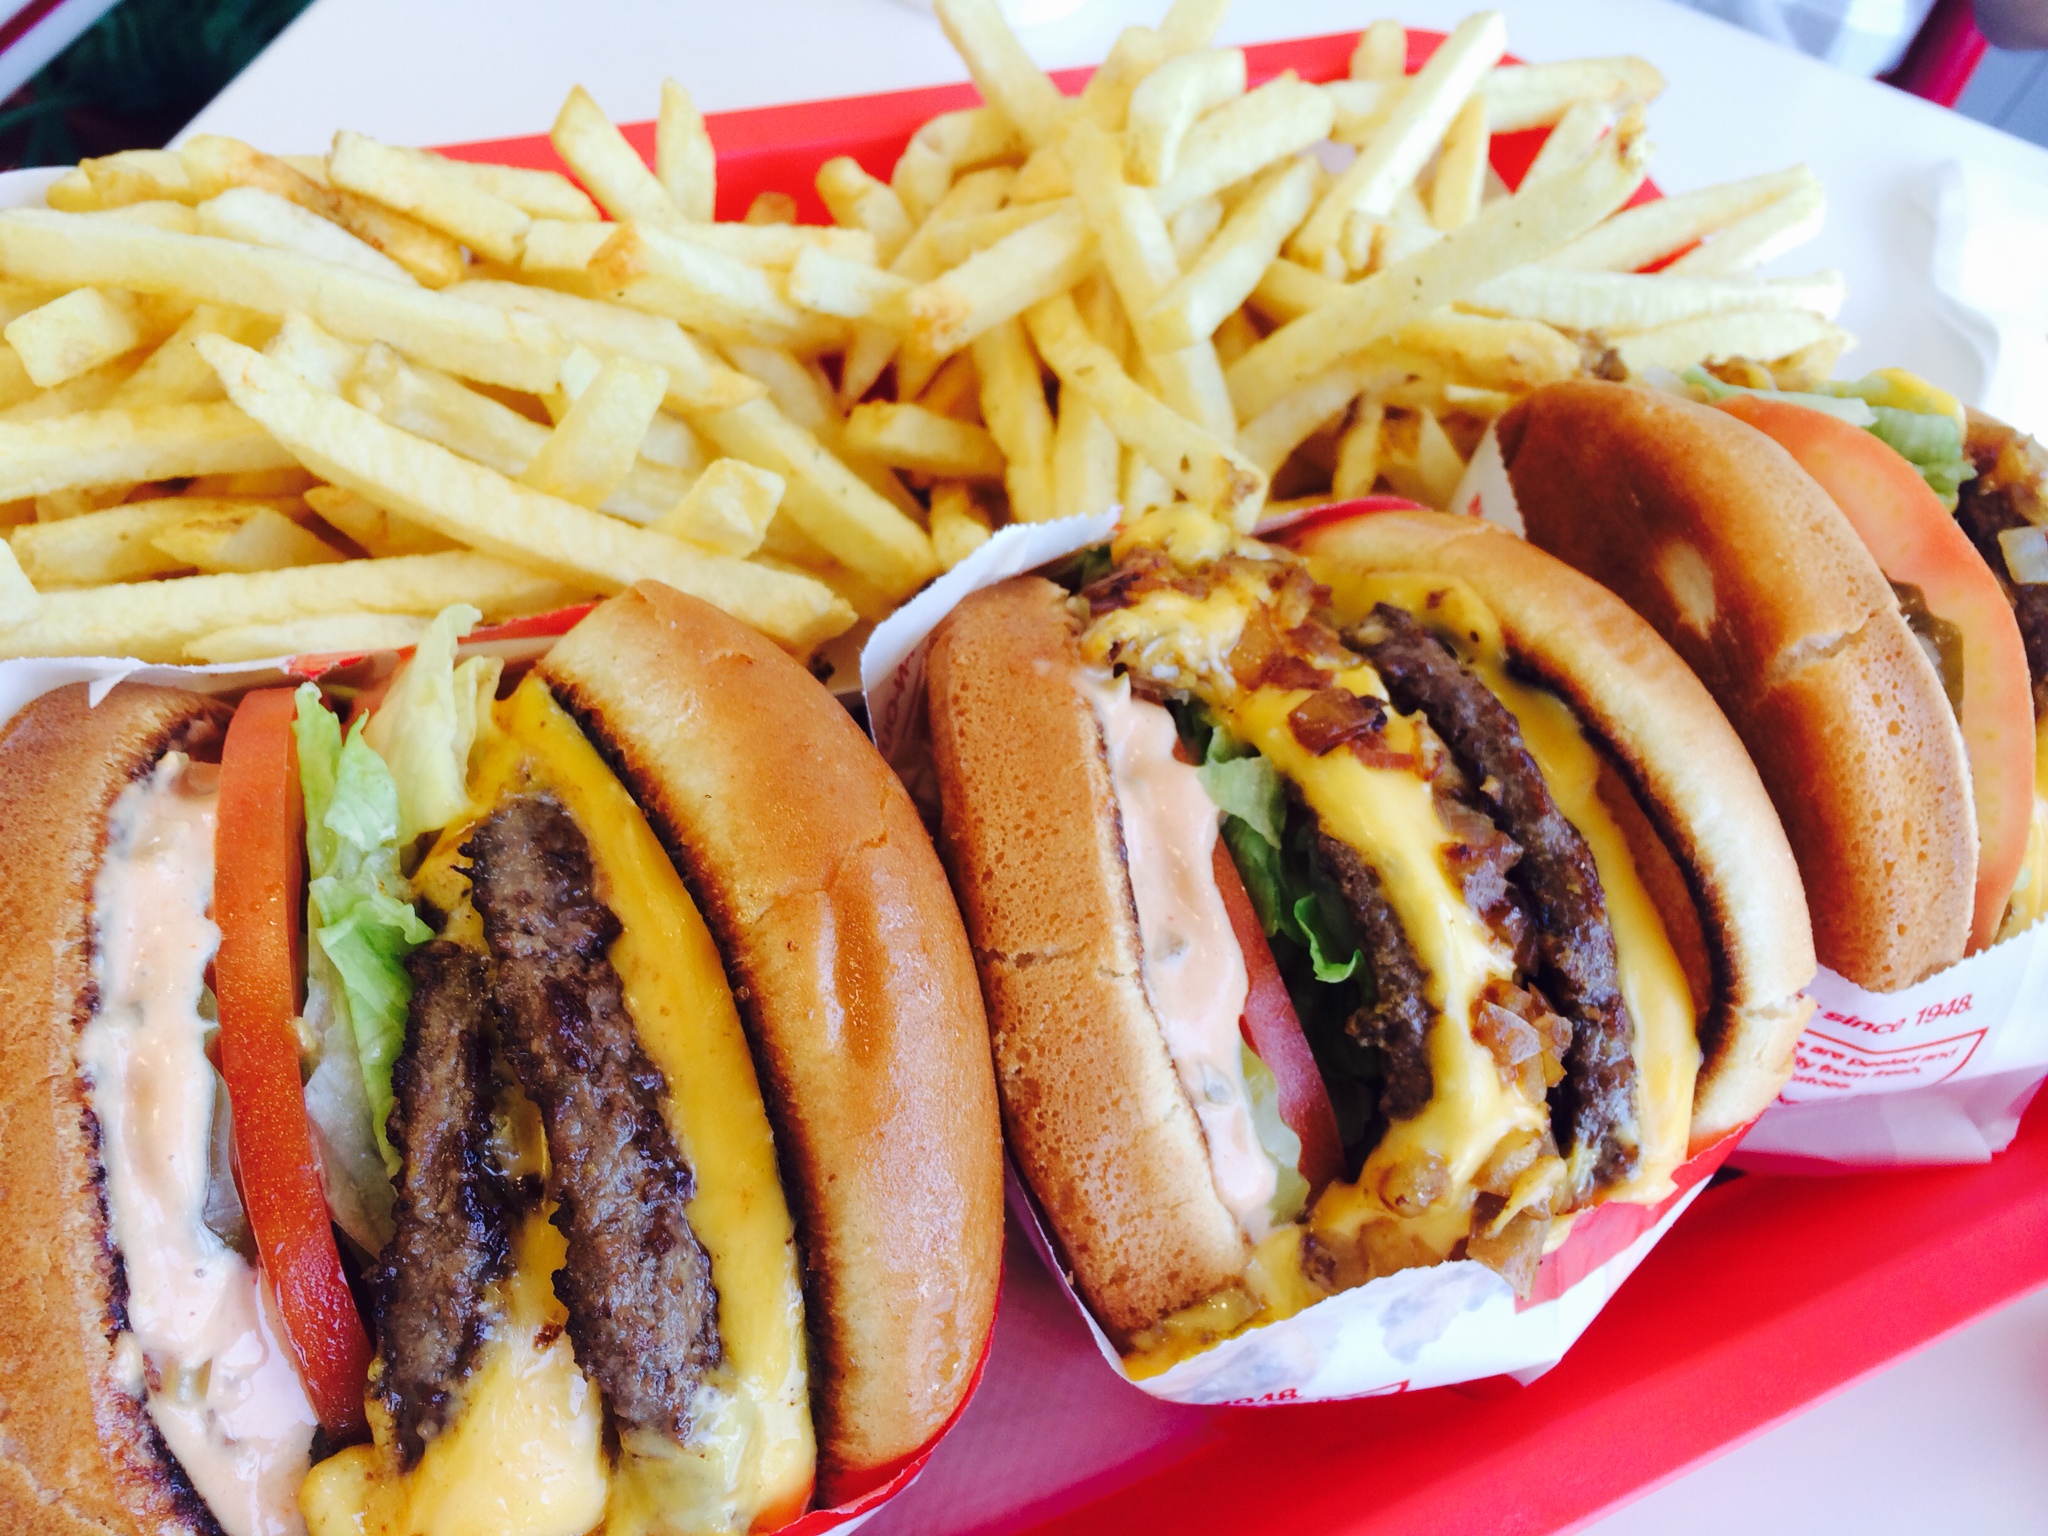 Legendary US Burger Chain In N Out Burger Is Popping Up In London Today ...